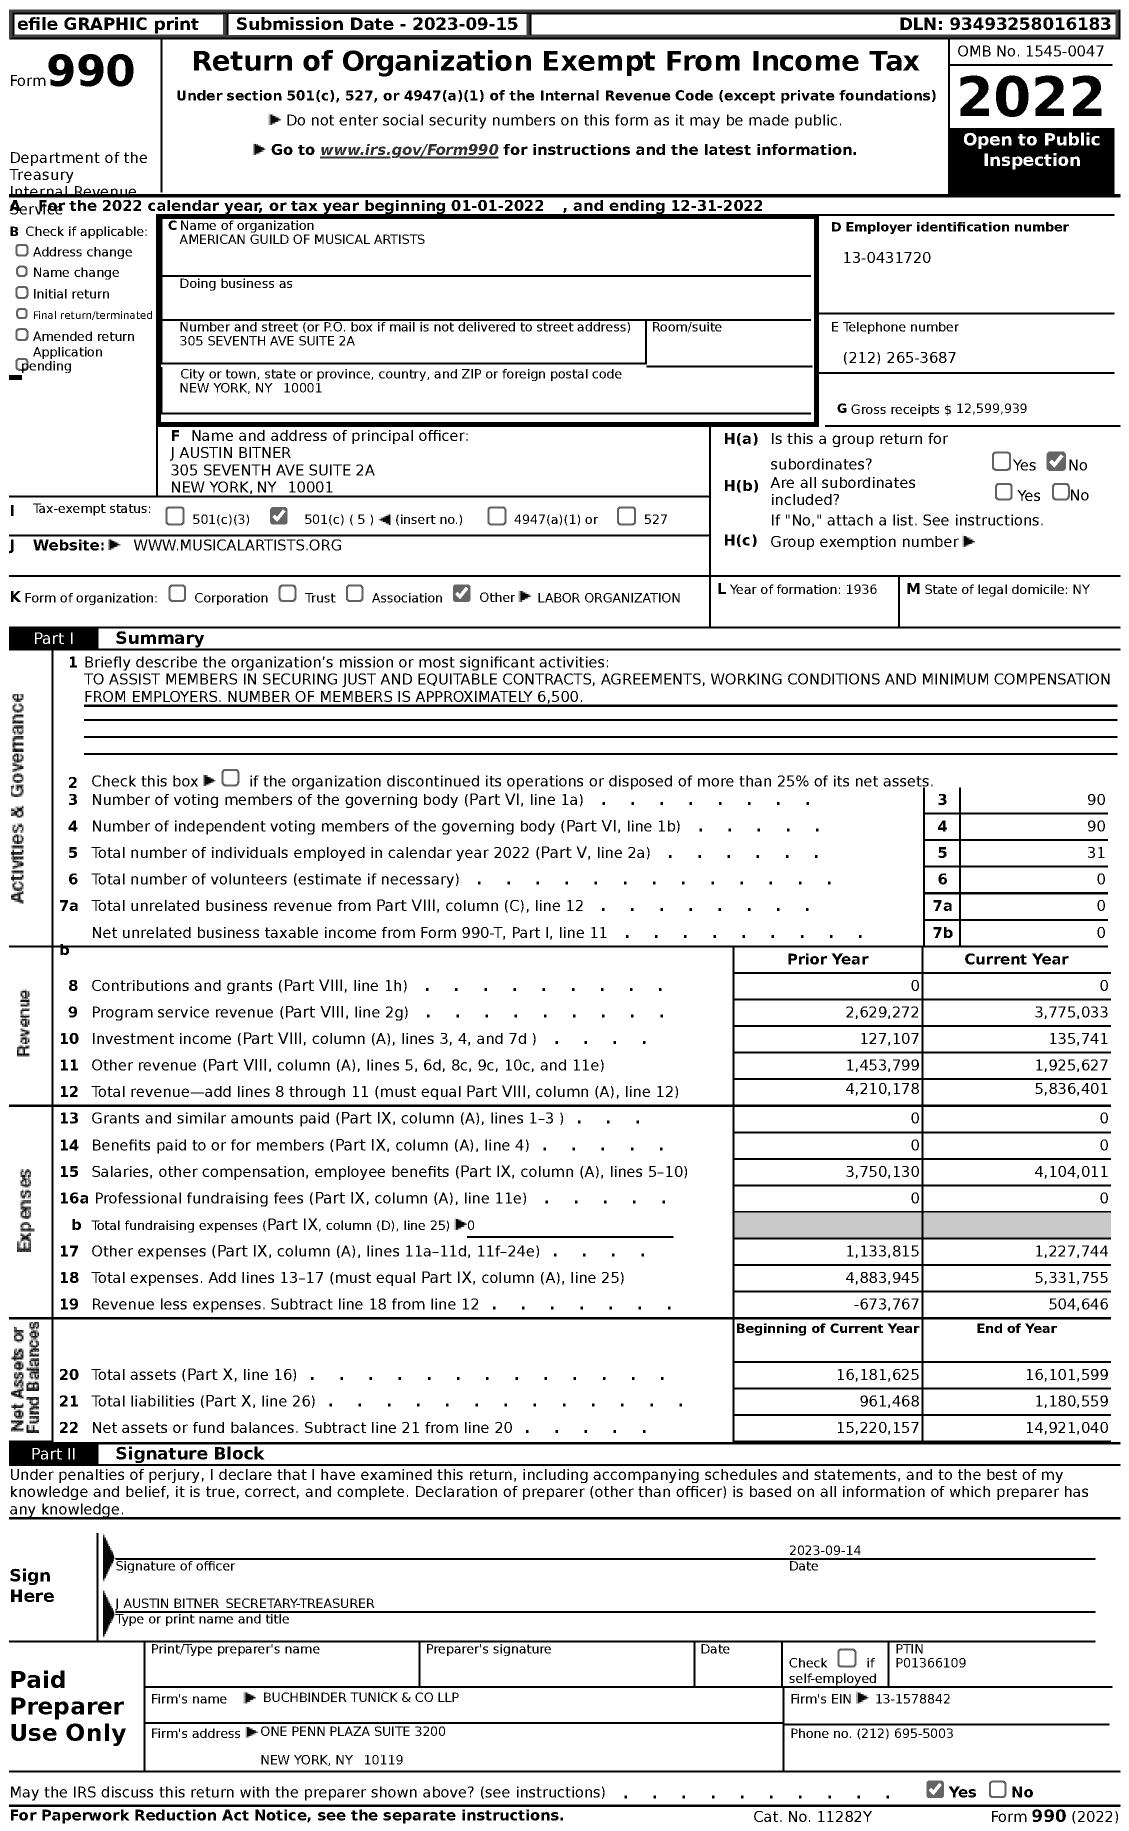 Image of first page of 2022 Form 990 for American Guild of Musical Artists